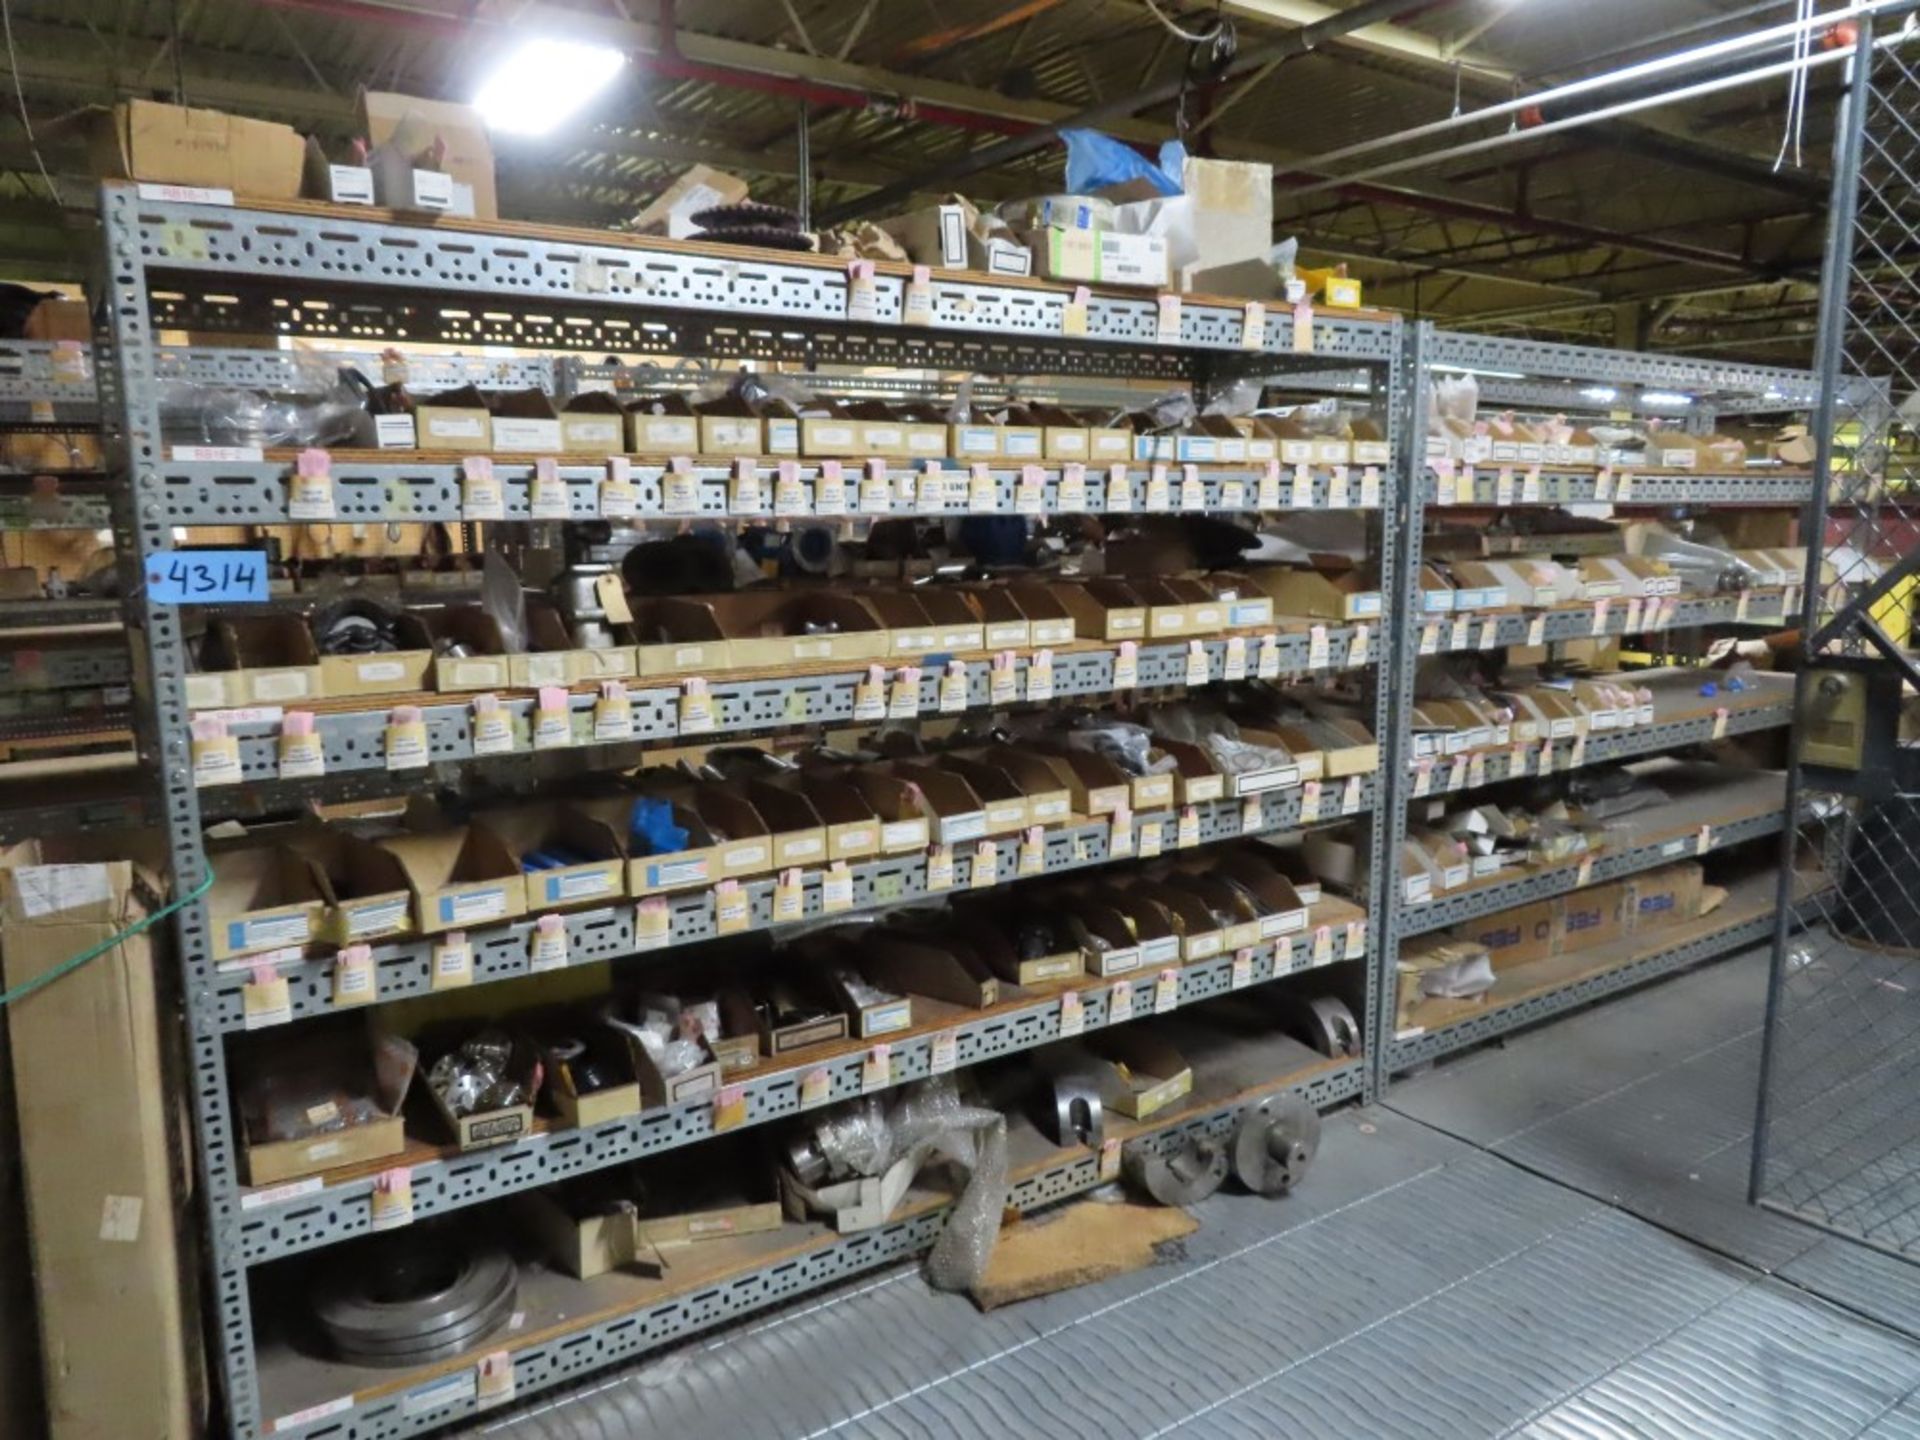 FIRST 1/2 OF MEZZANINE SHELVING, INCLUDING: HAND WHEELS, GEAR BOXES, CYLINDERS, SHAFTS, SPROCKETS (N